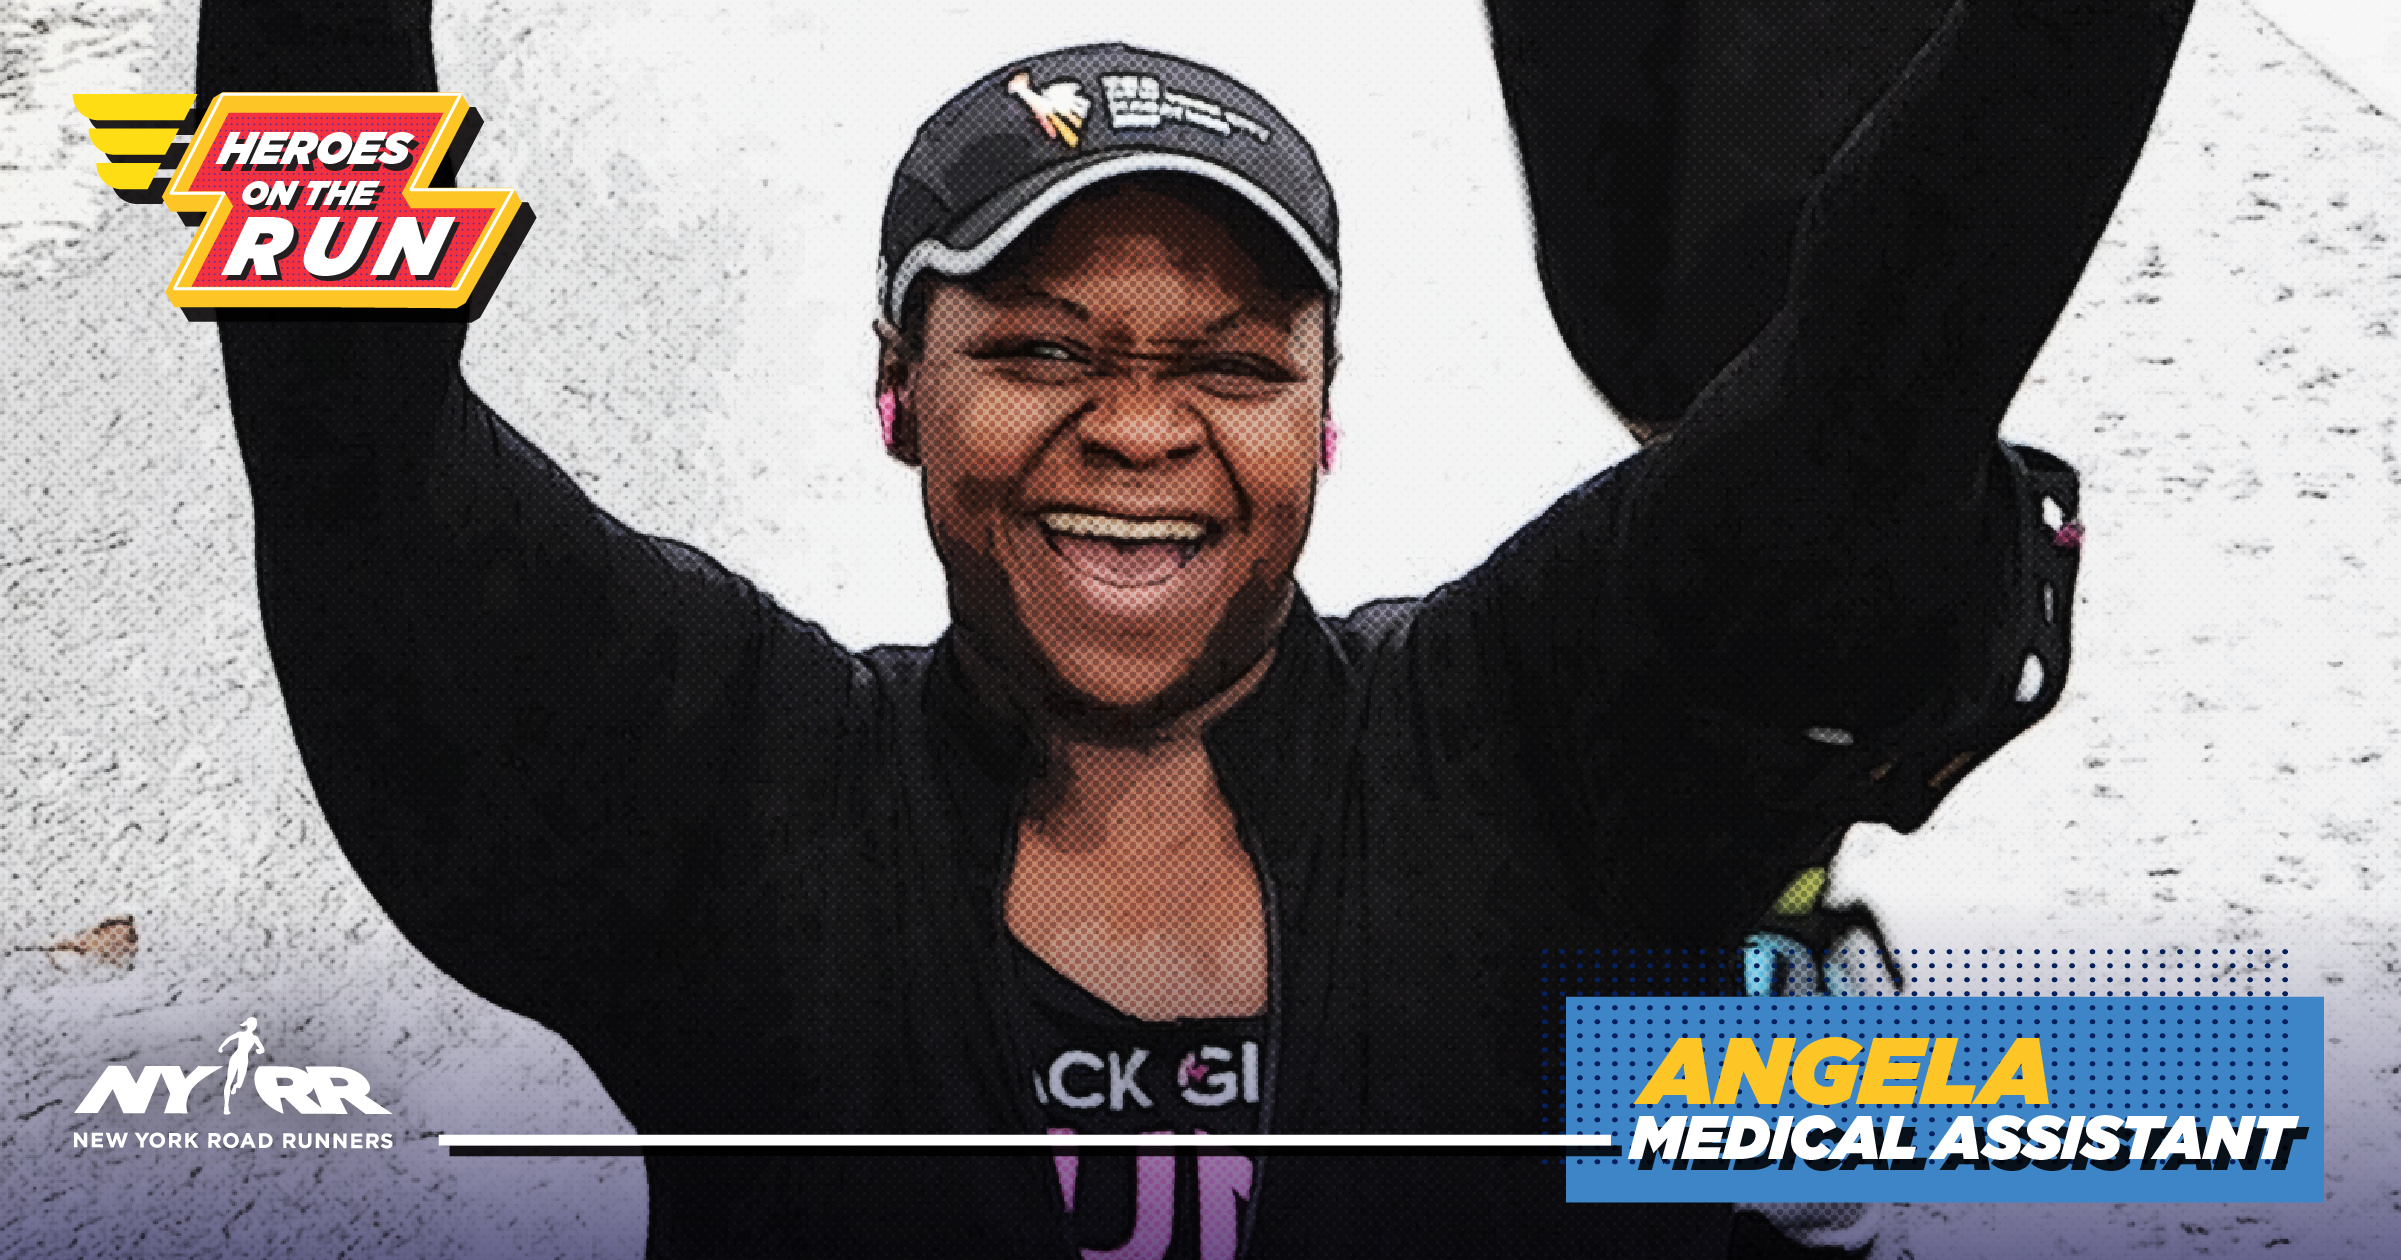 Angela Wint celebrating in the middle of a race, with the Heroes on the Run logo and "Angela: Medical Assistant" overlaid